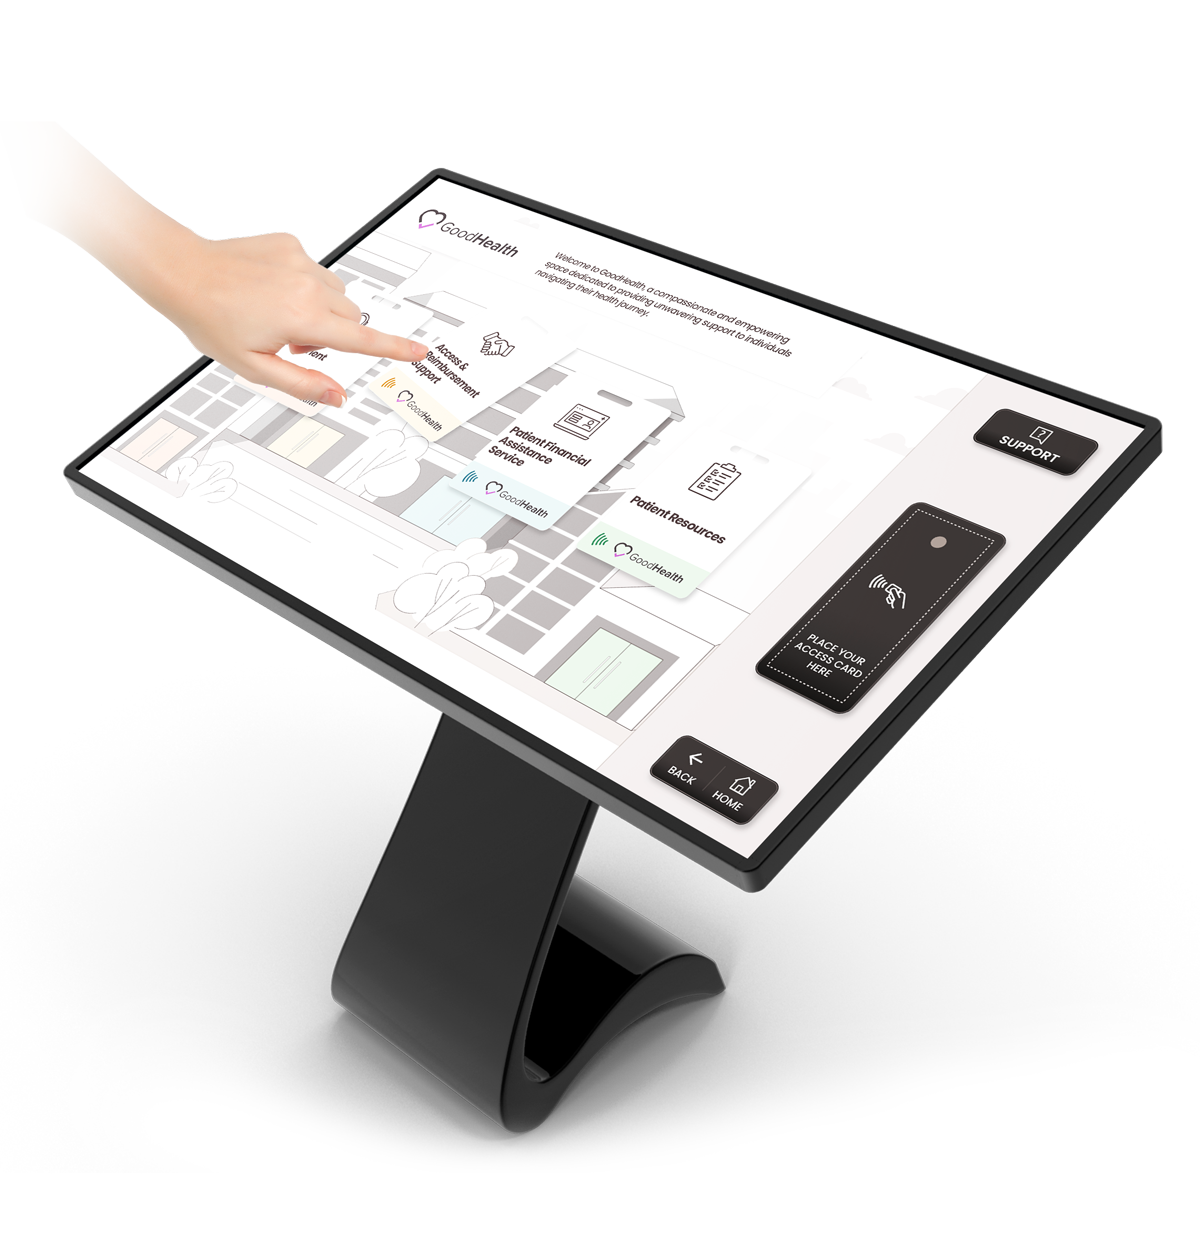 Touch screen with Interactive Kiosk Experience